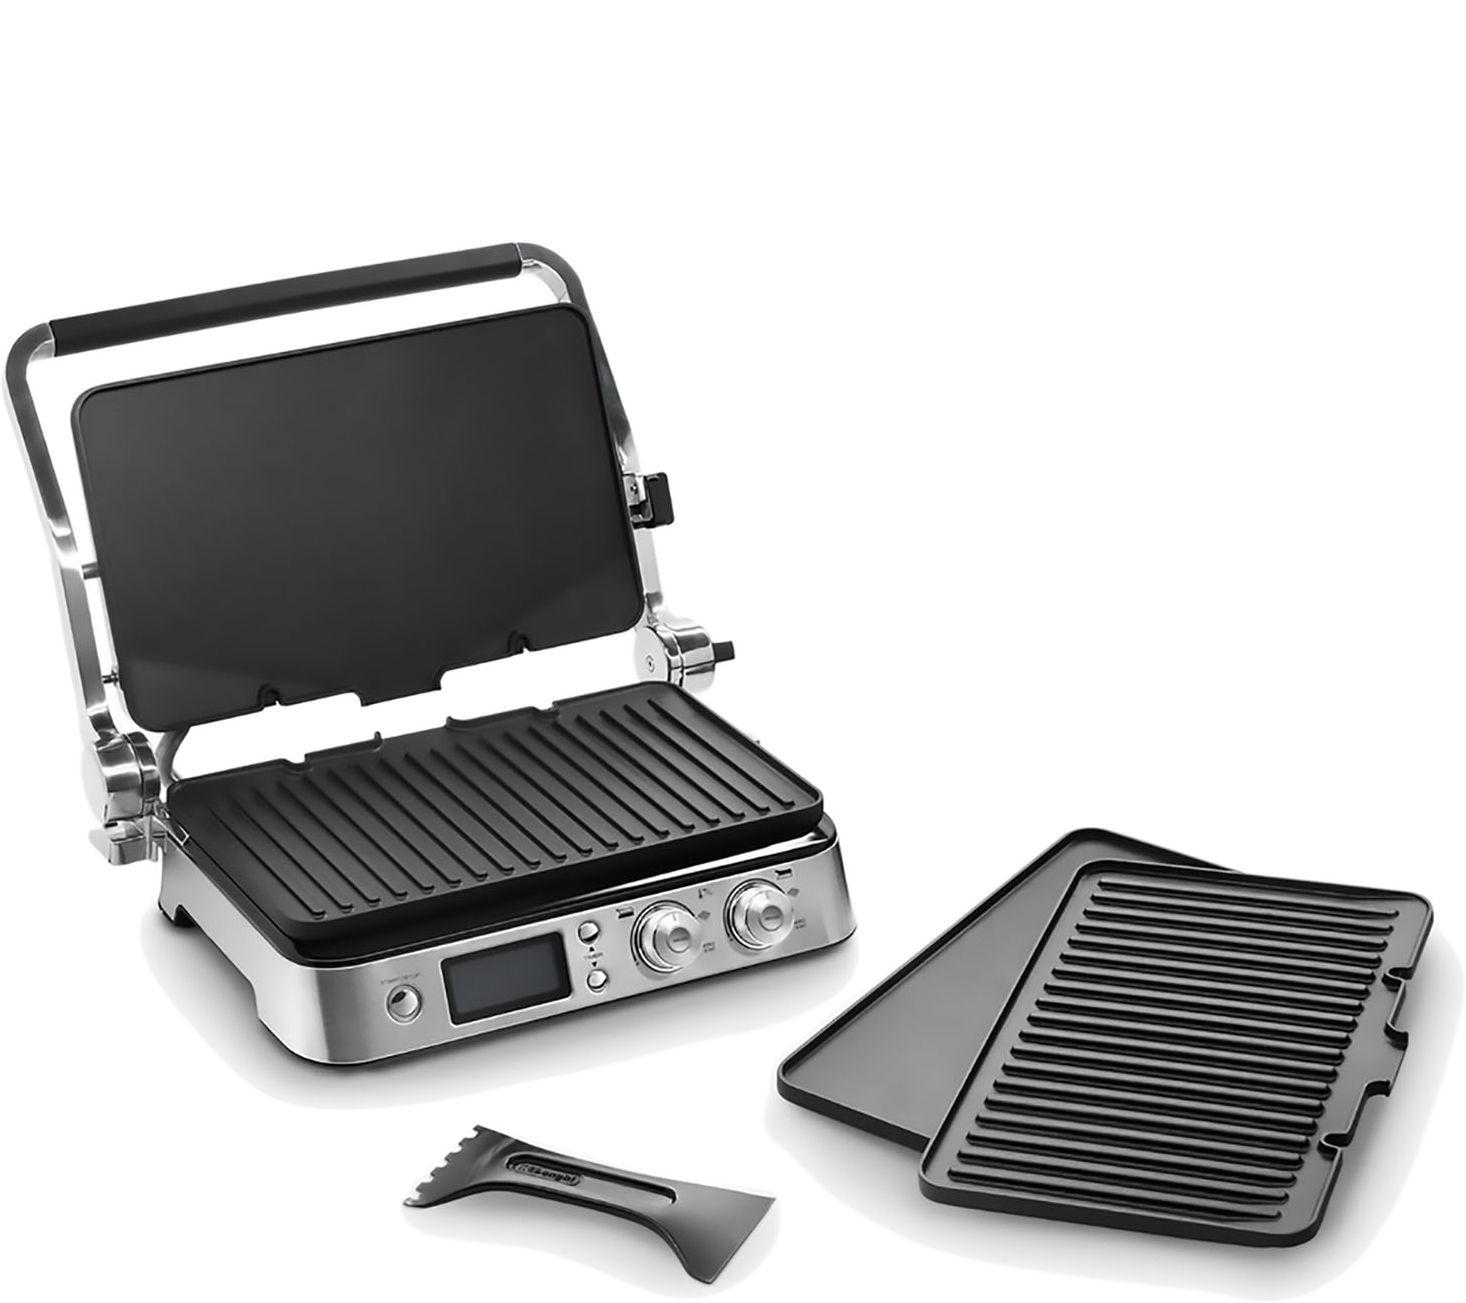 DeLonghi Livenza Compact All Day Grill 3 in 1 Waffle Grill Griddle